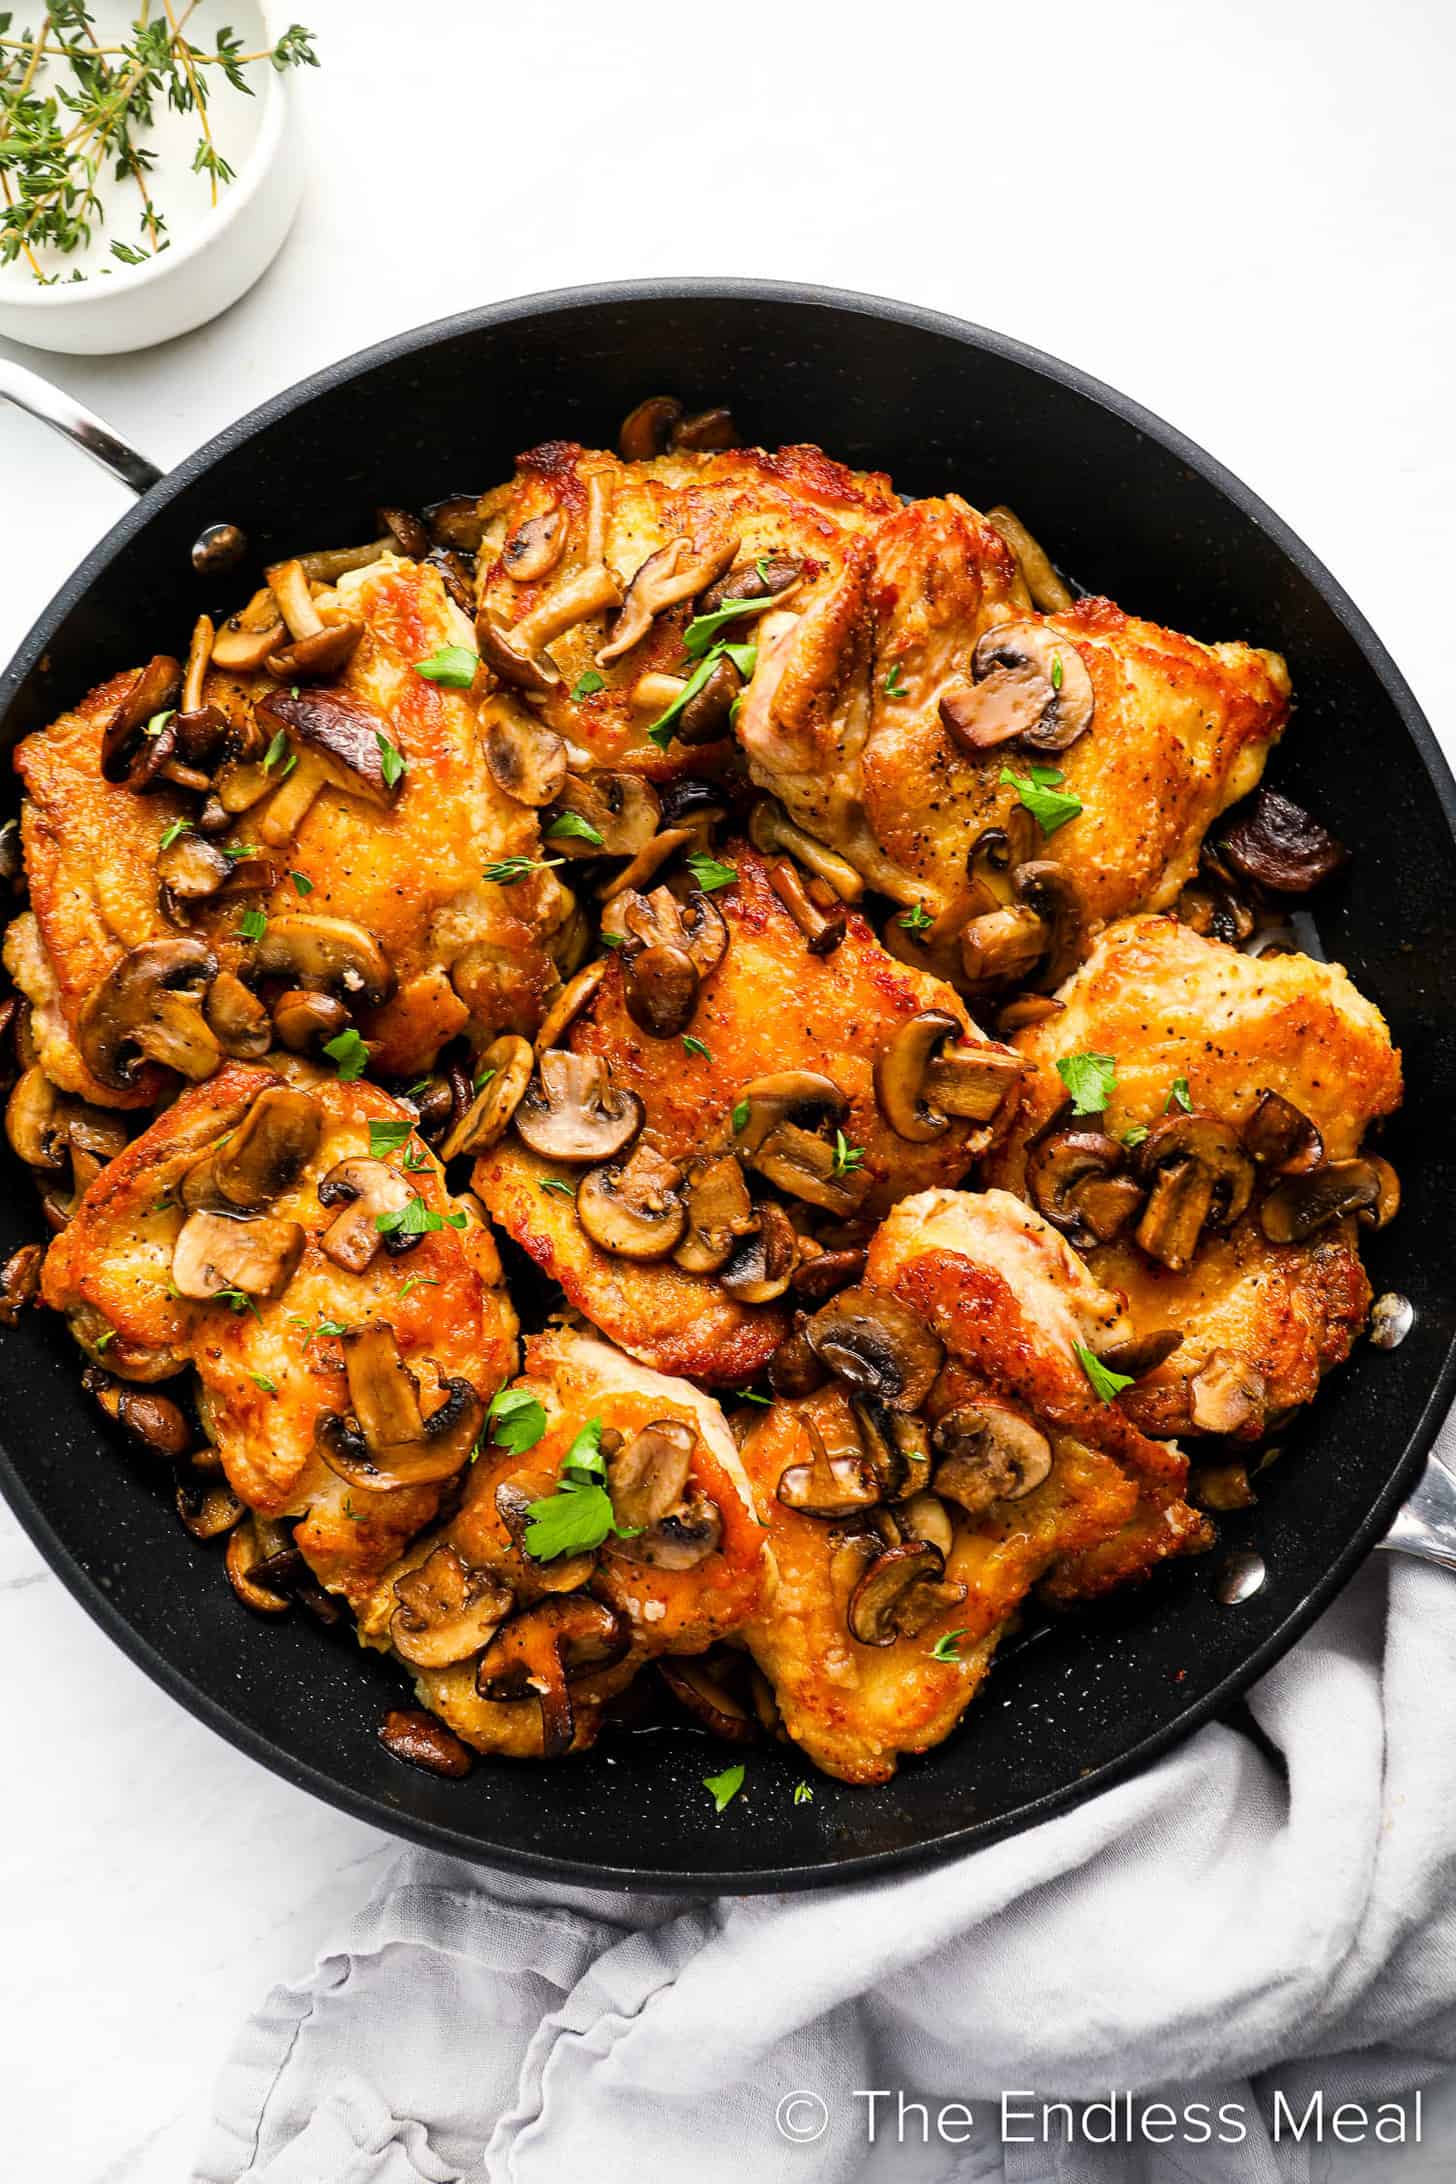 Chicken and Mushrooms recipe being cooked in a frying pan